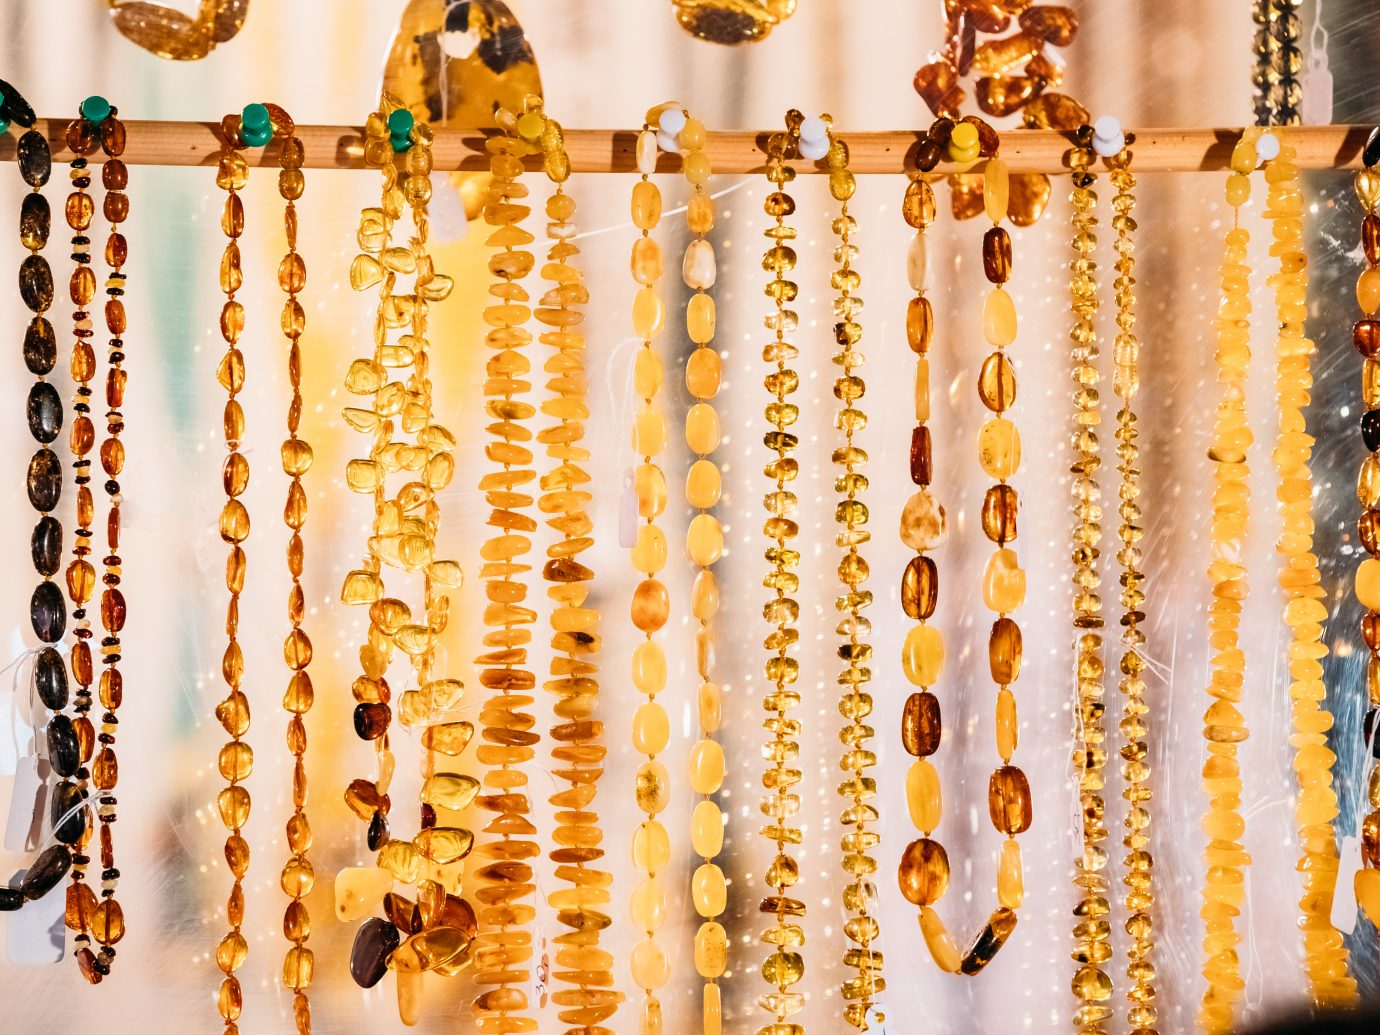 Variety Of Beads Made Of Amber. Jewellery Made Of Amber. Traditional Souvenirs At European Market. Souvenir From Baltic Countries, Europe.